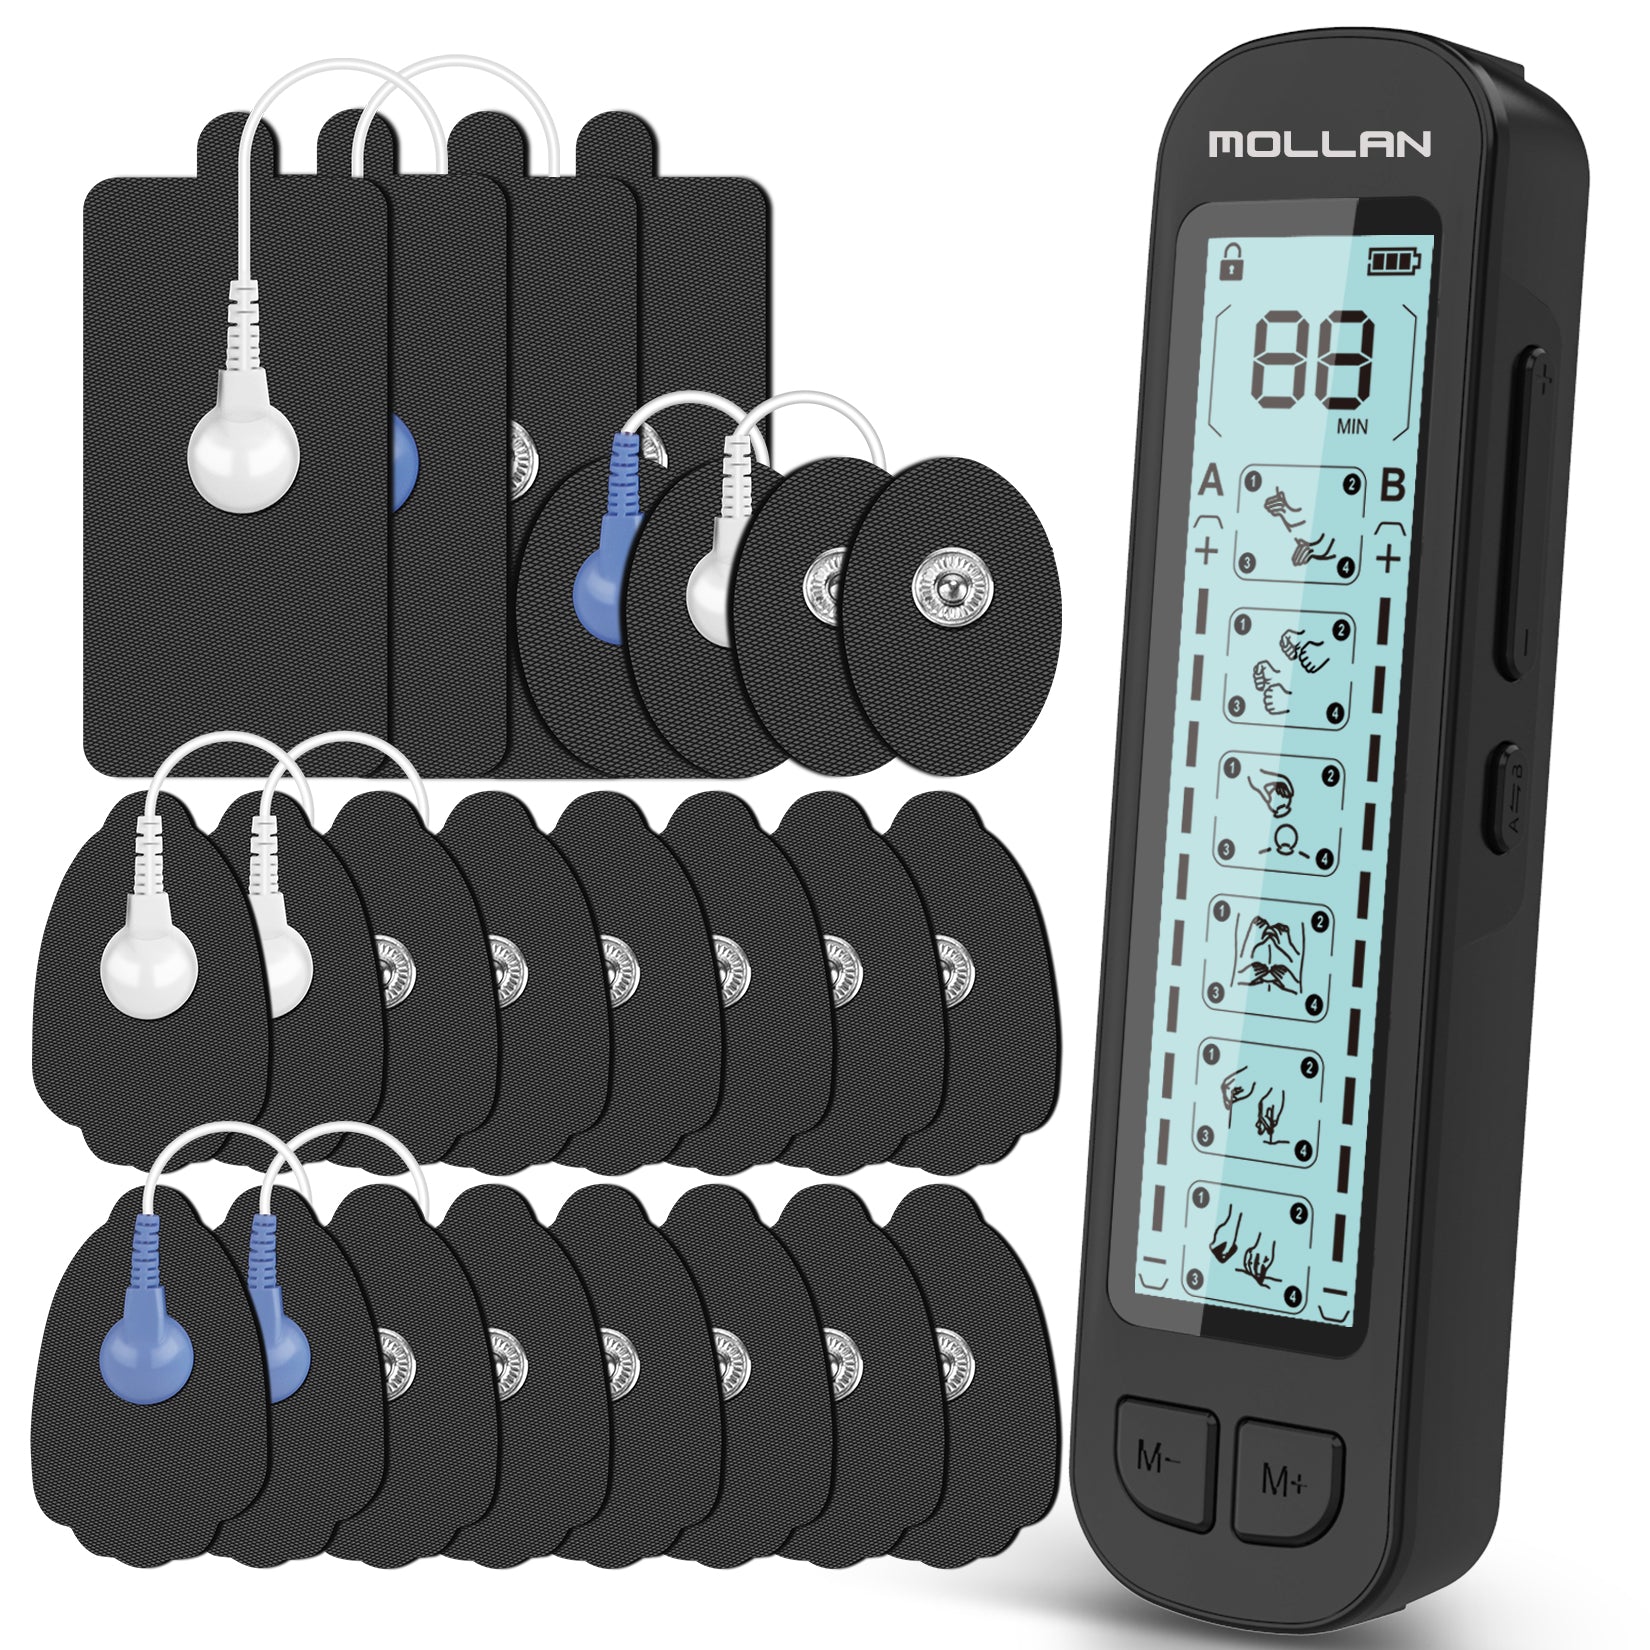 36 Modes EMS TENS Unit, Mollan Dual Channel Muscle Stimulator with 12x2  Electrode Pads, Electronic Pulse Massager for Pain Relief Muscle Strength  Shoulder, Back, Leg, Foot, Chronic and Arthritis…